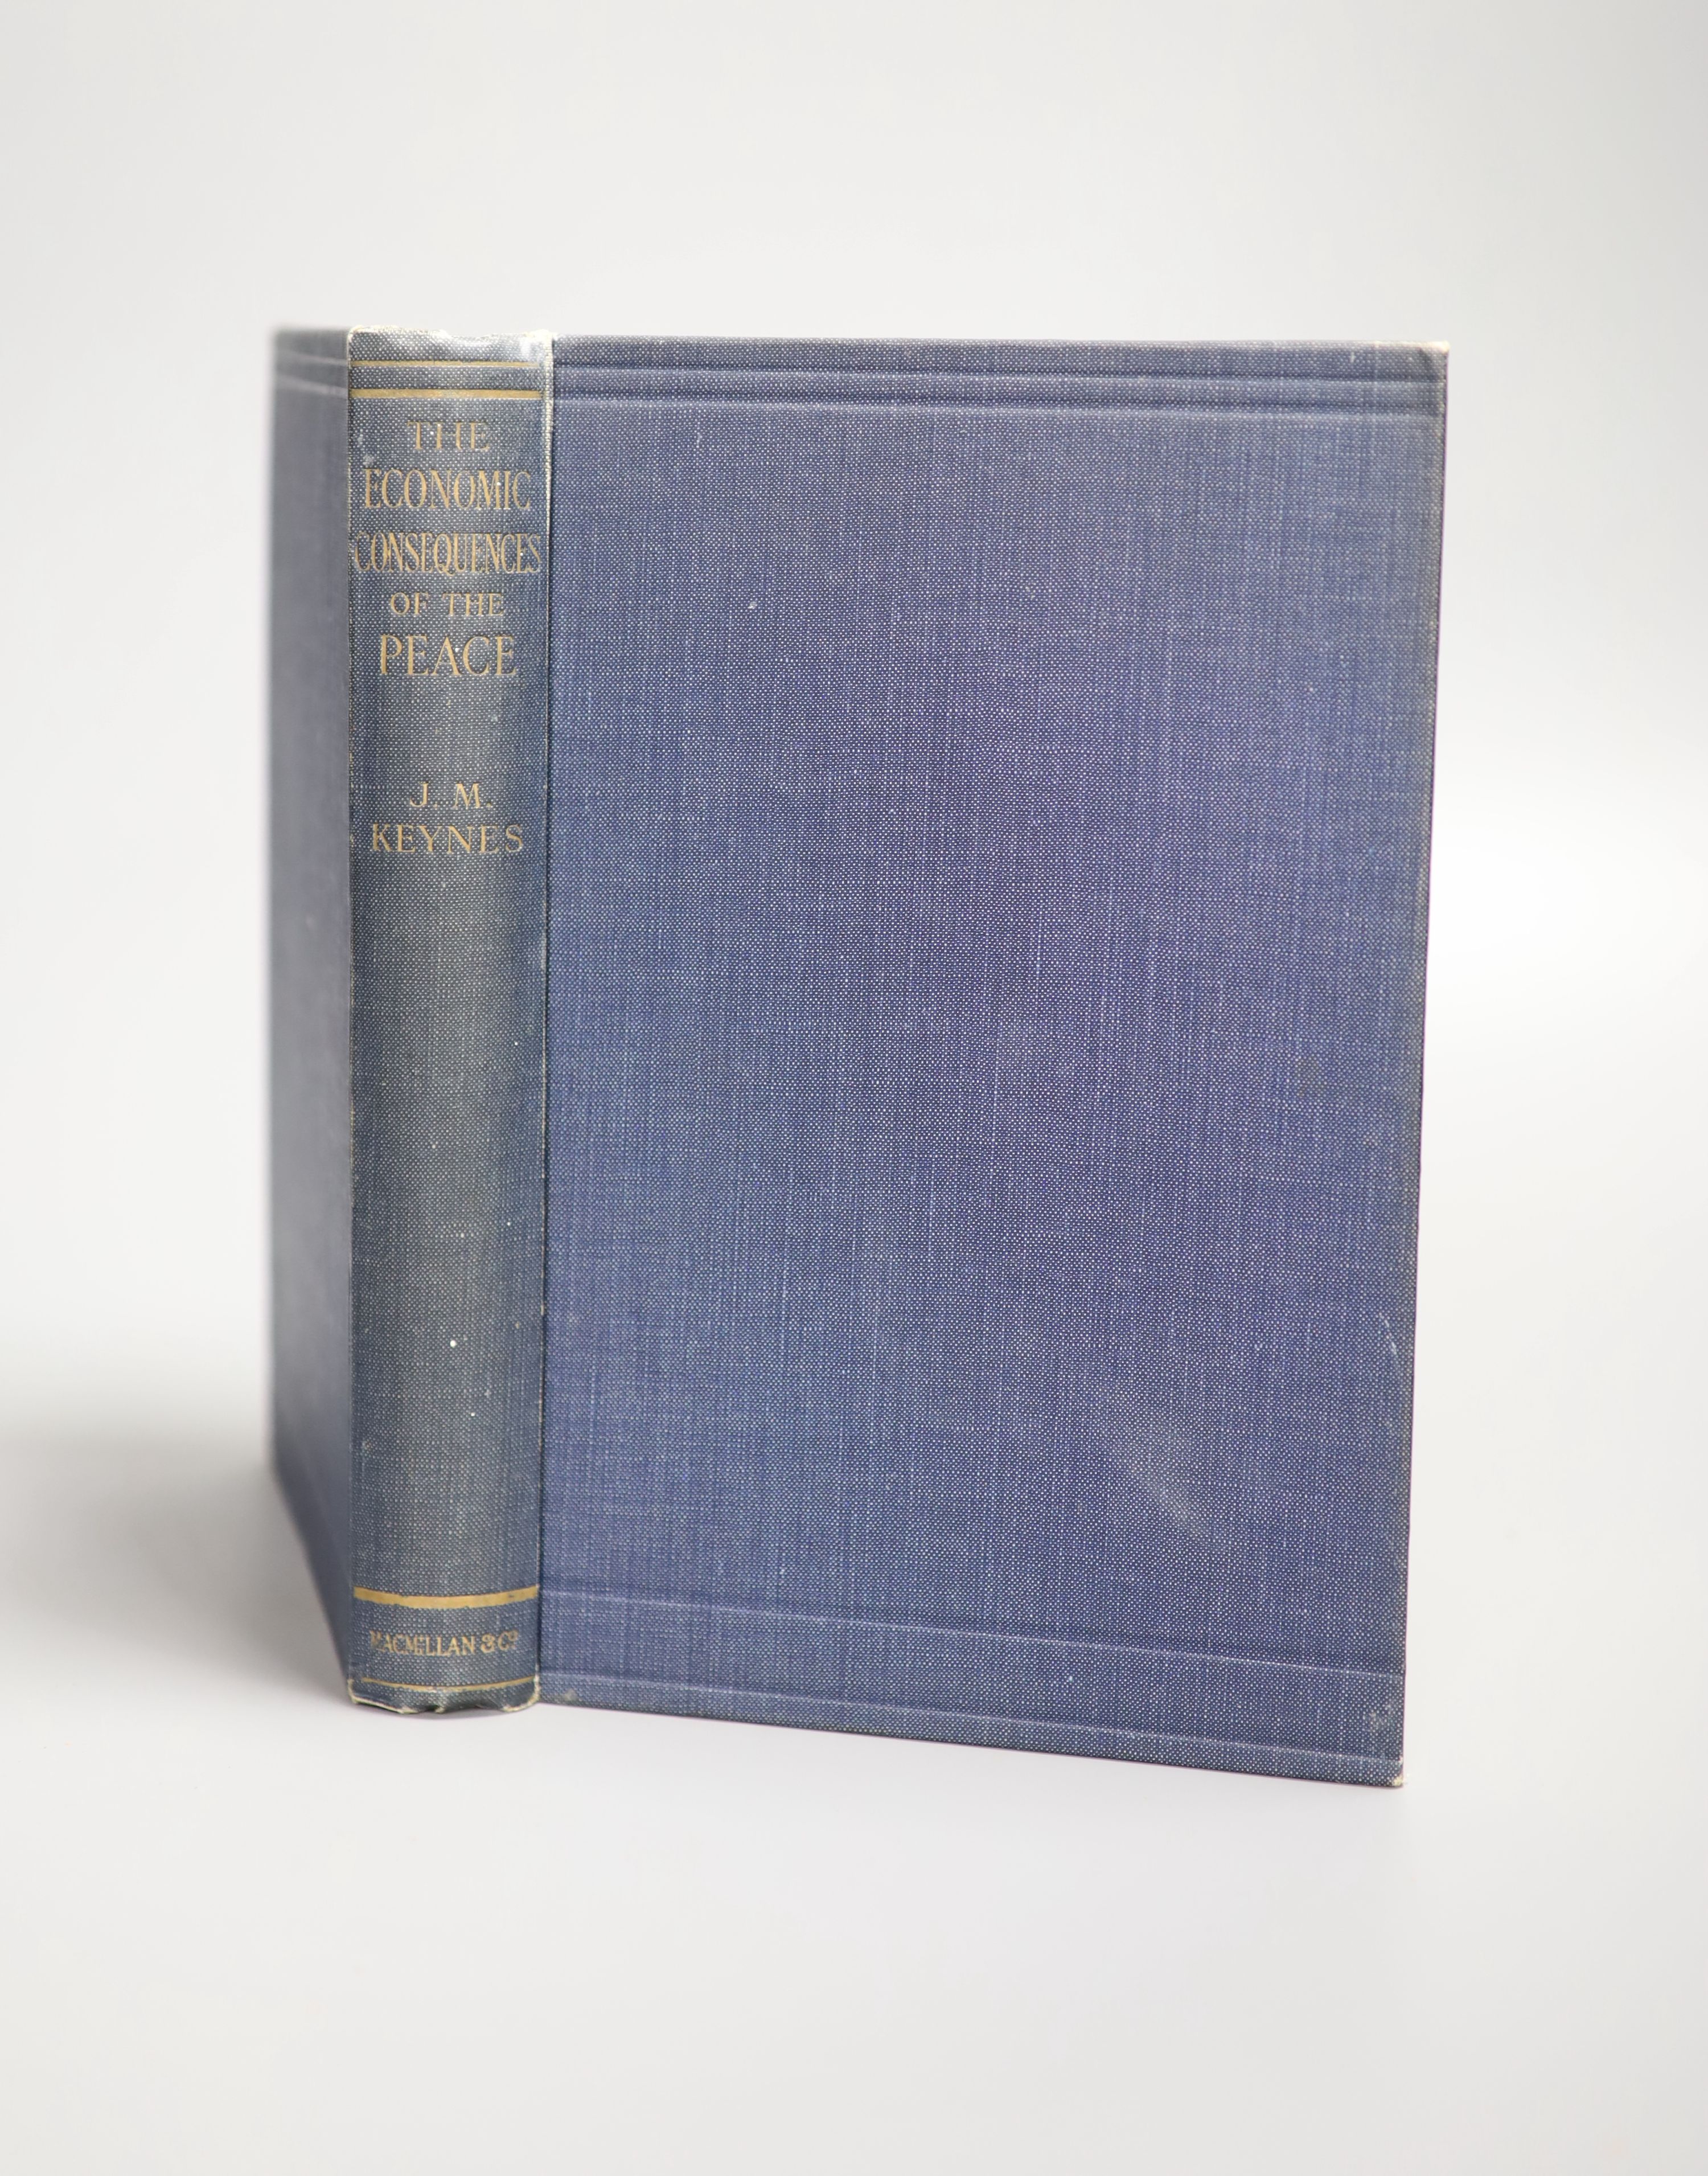 Keynes, John Maynard, 1st Baron - The Economic Consequences of the Peace, 1st edition, 8vo, original cloth, owners inscription to front free endpaper, dated 1919, Macmillan, London, 1919